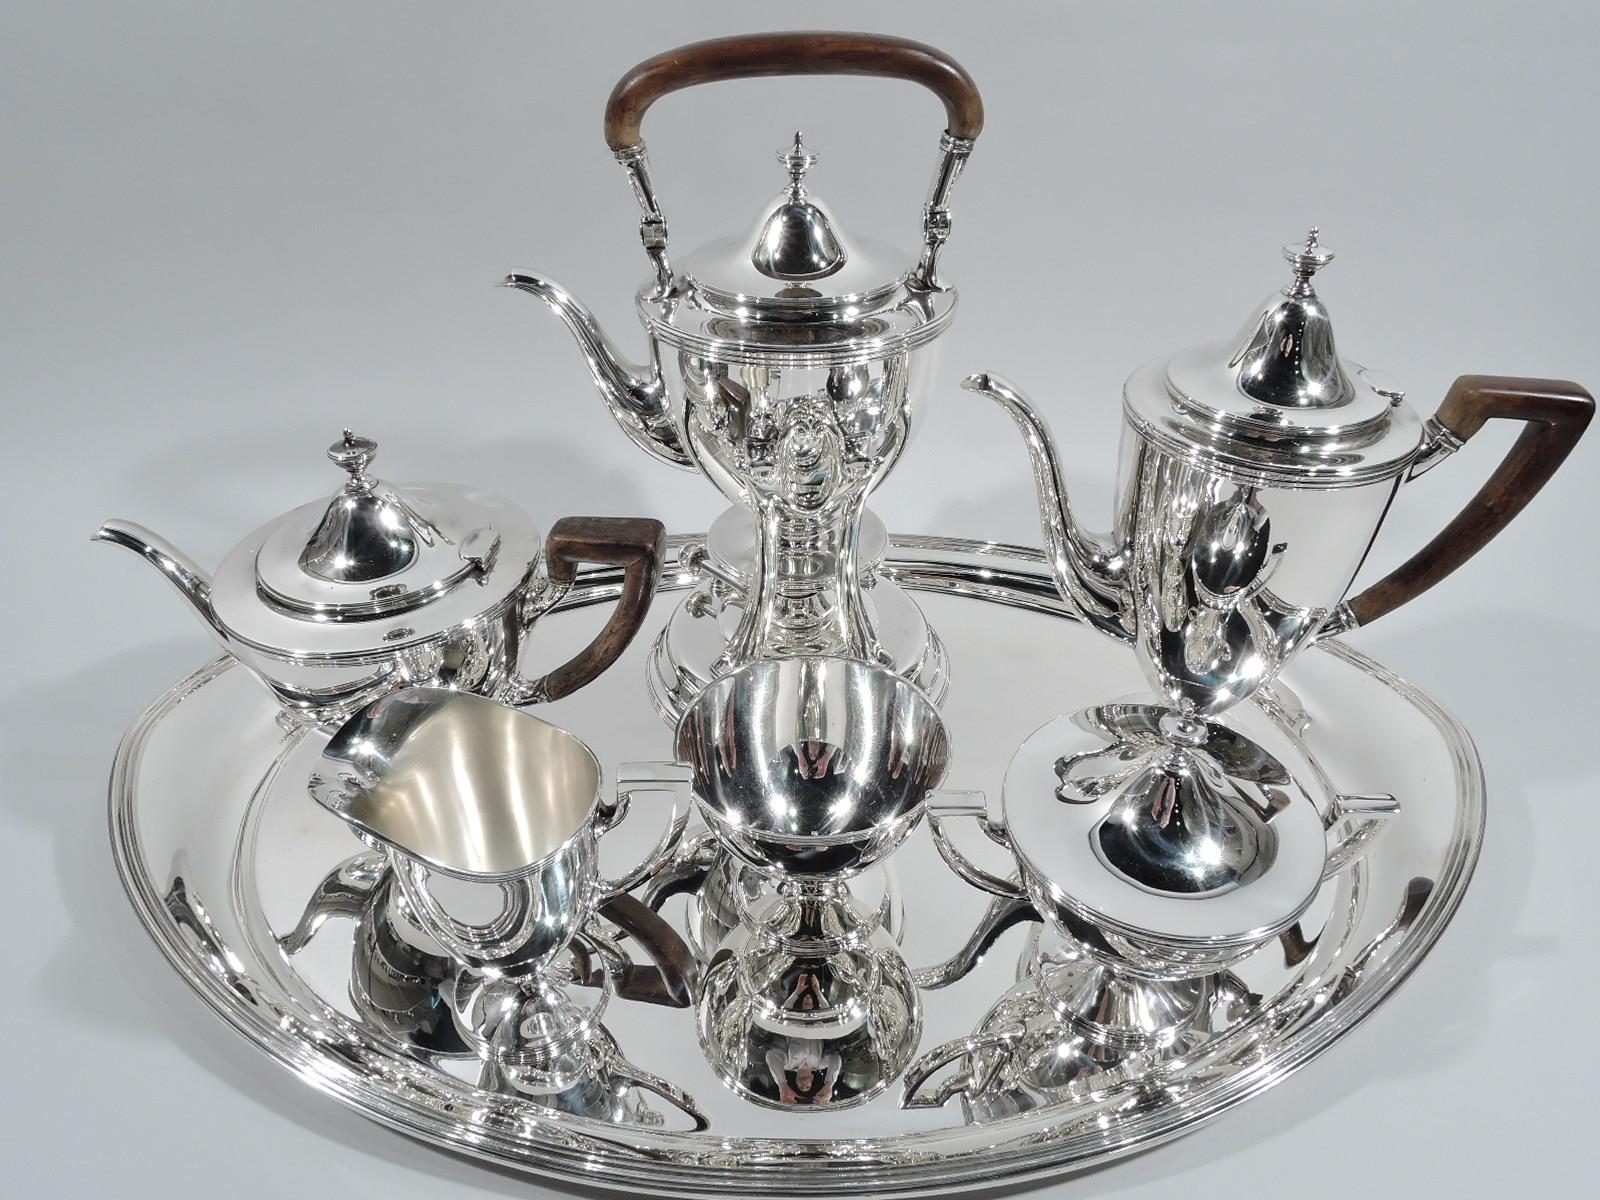 American Classical sterling silver 6-piece coffee and tea set on tray. Made by Tiffany & Co. in New York, ca 1915. This set comprises hot water kettle on stand, coffeepot, teapot, creamer, sugar, and waste bowl. Each: Curved and tapering body on